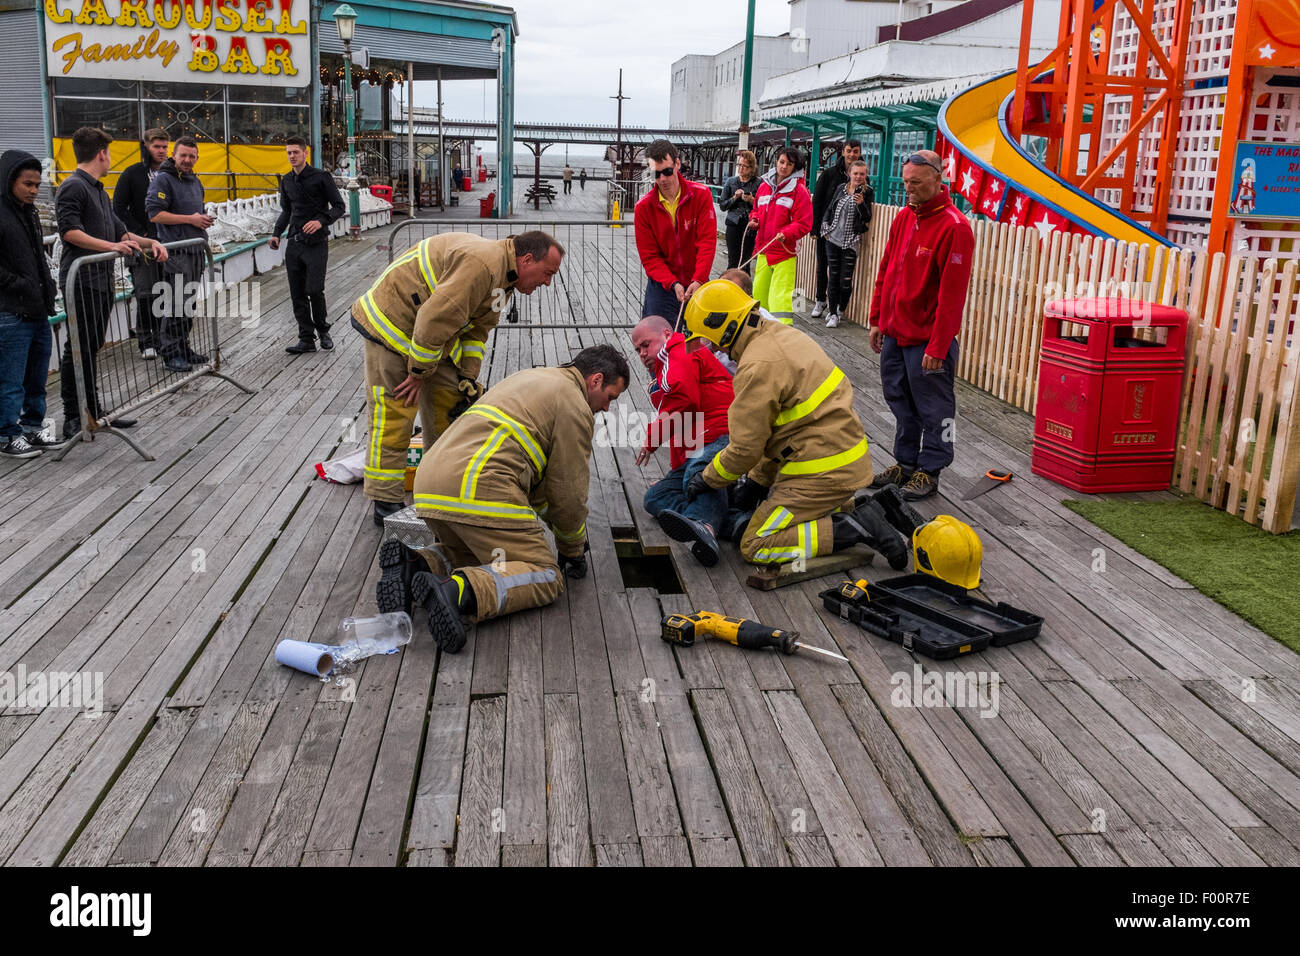 Blackpool, UK. 4th August, 2015. Man gets stuck on North Pier, Blackpool after his foot goes through floor, cut free by Fire Brigade. Credit:  Ian Walker/Alamy Live News Stock Photo